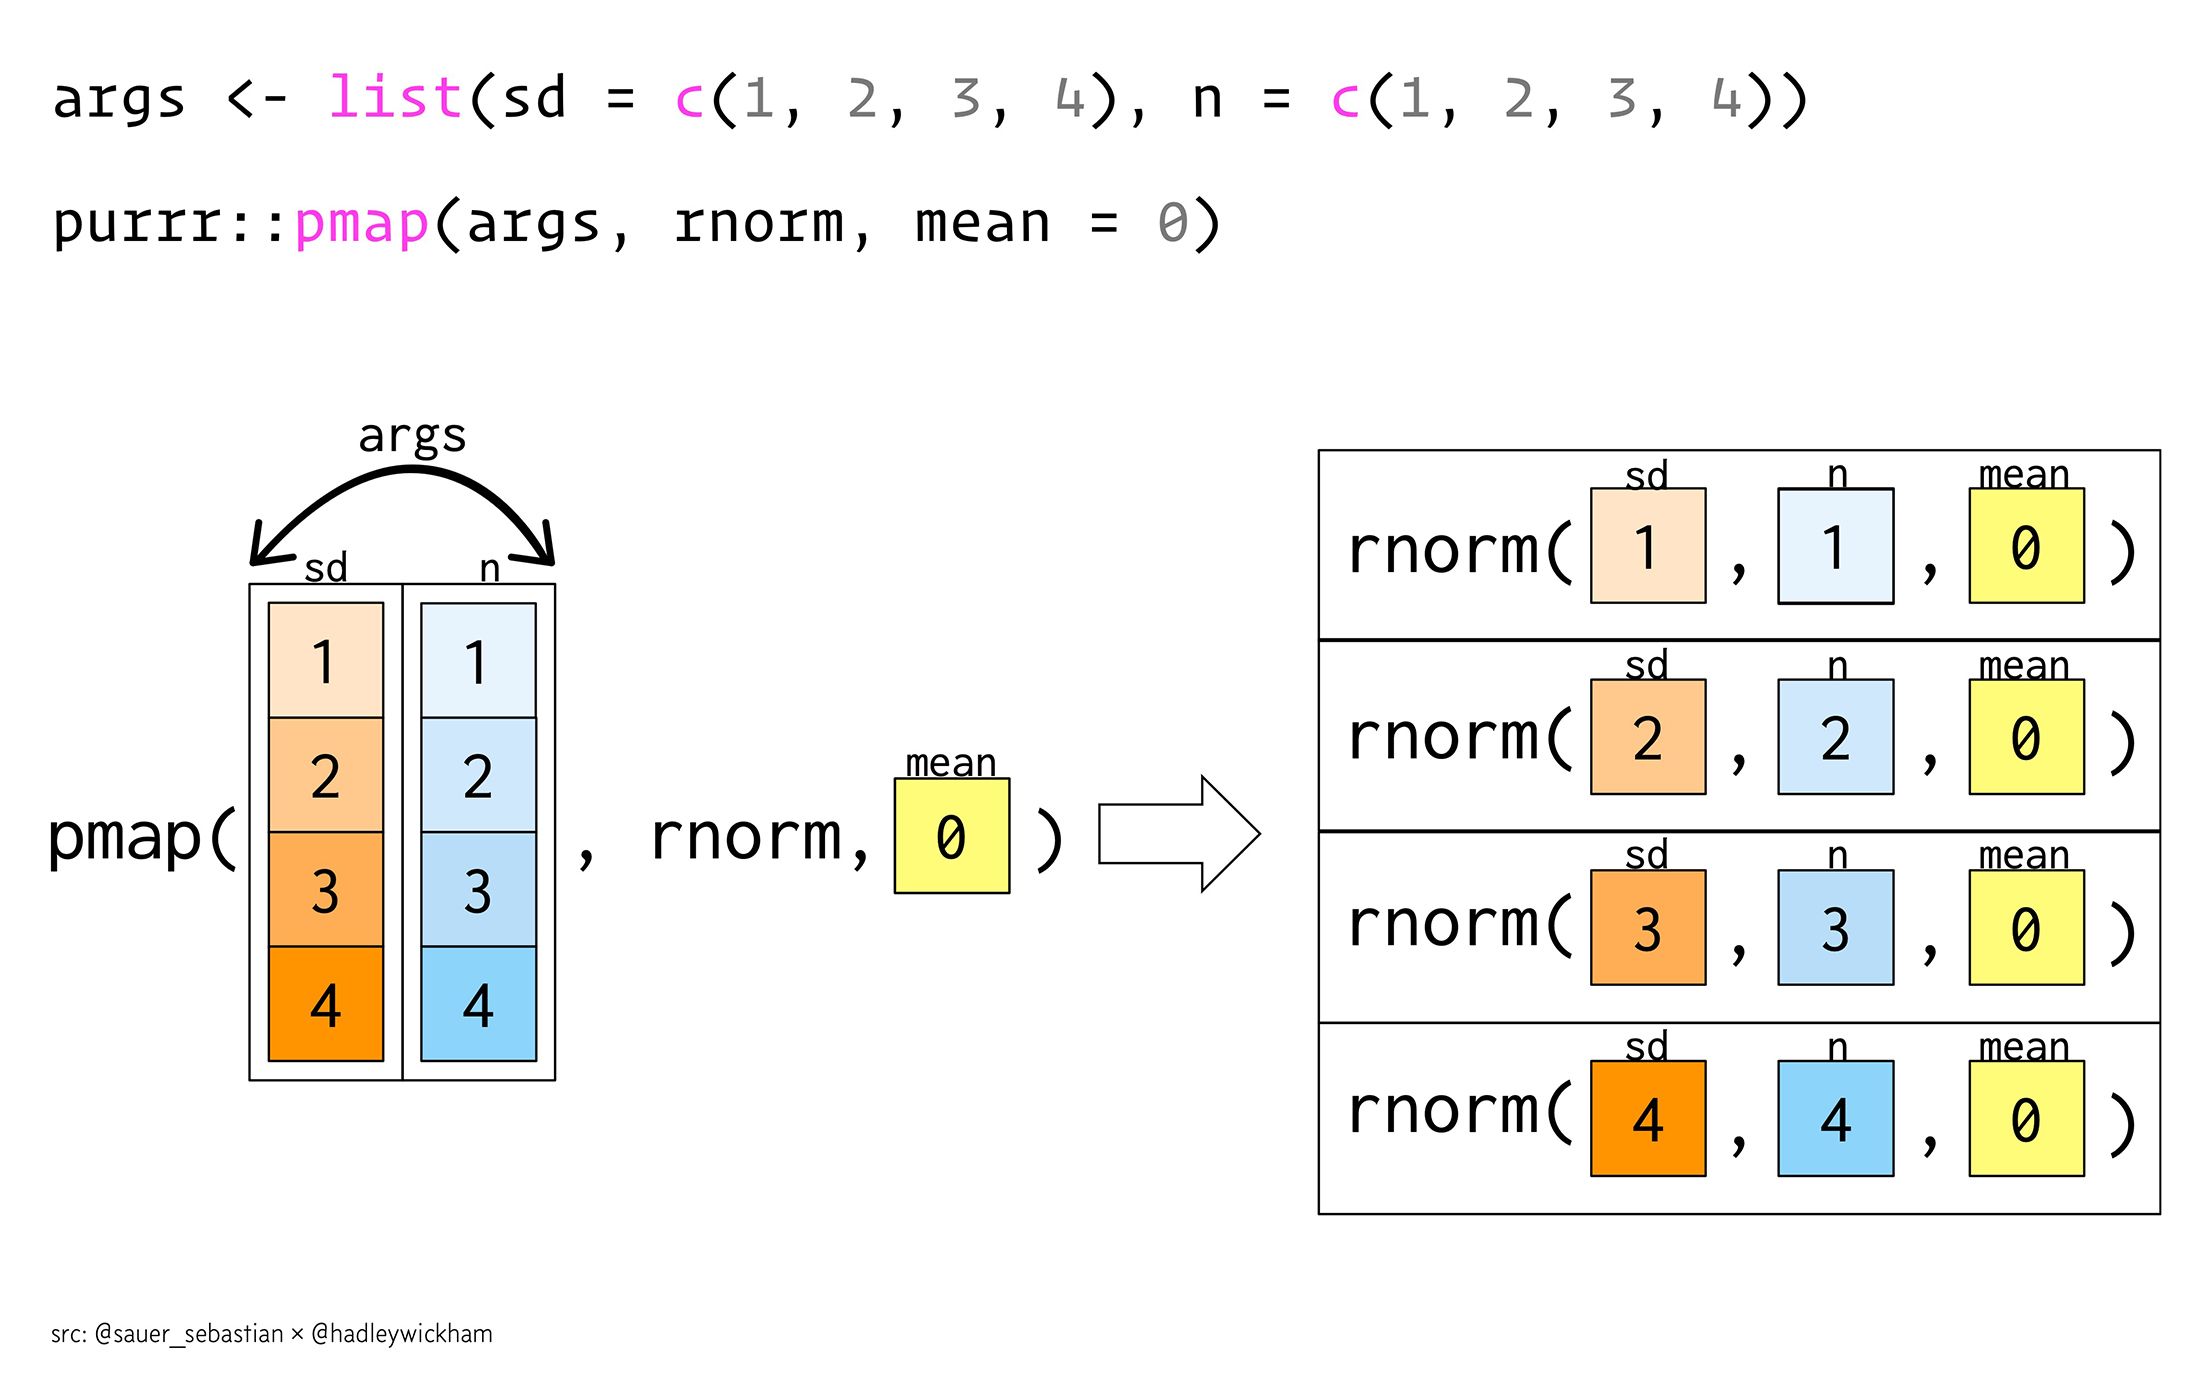 pmap function to each row of a list in purrr package ([source](https://data-se.netlify.app/2019/09/28/looping-over-function-arguments-using-purrr/))